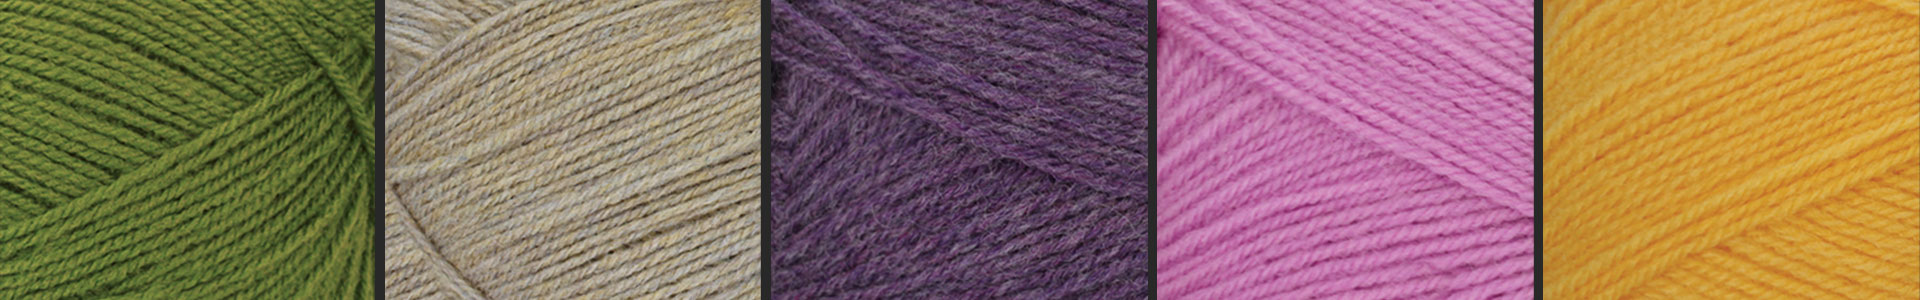 Wendy Wools logo with different colored yarns